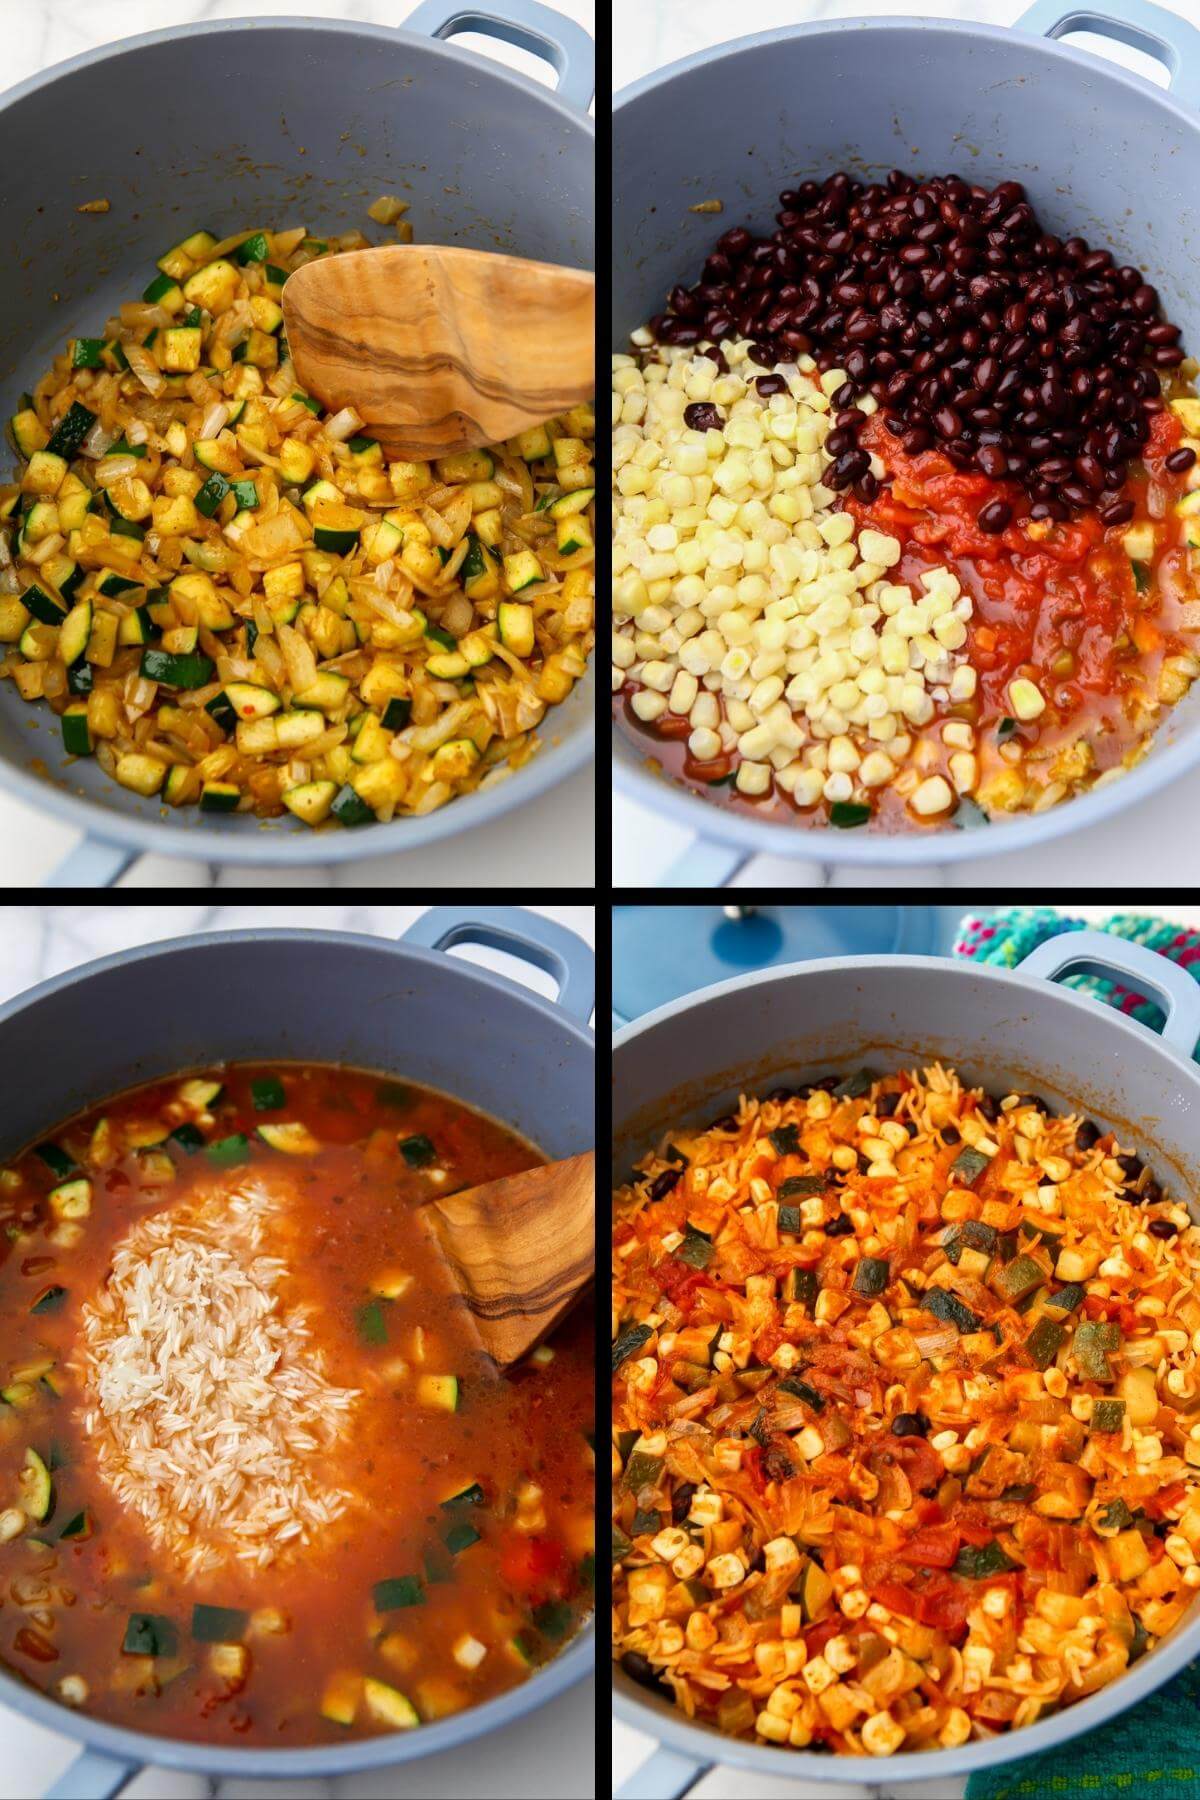 A collage of 4 images showing the process steps for making vegan Mexican rice pilaf.